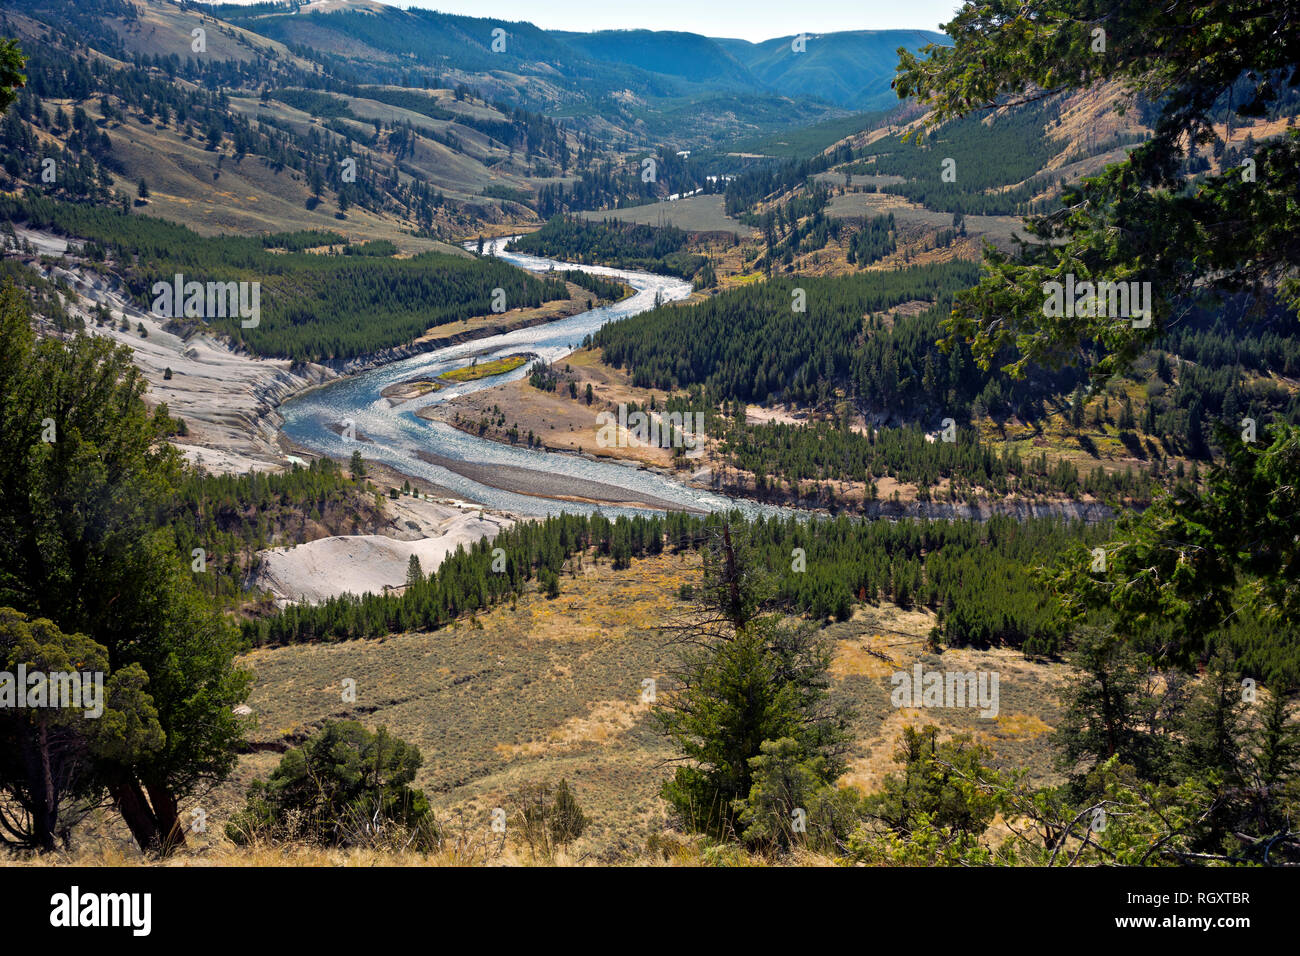 WY03071-00...WYOMING - The Grand Canyon of the Yellowstone River viewed from Specimen Ridge in Yellowstone National Park. Stock Photo